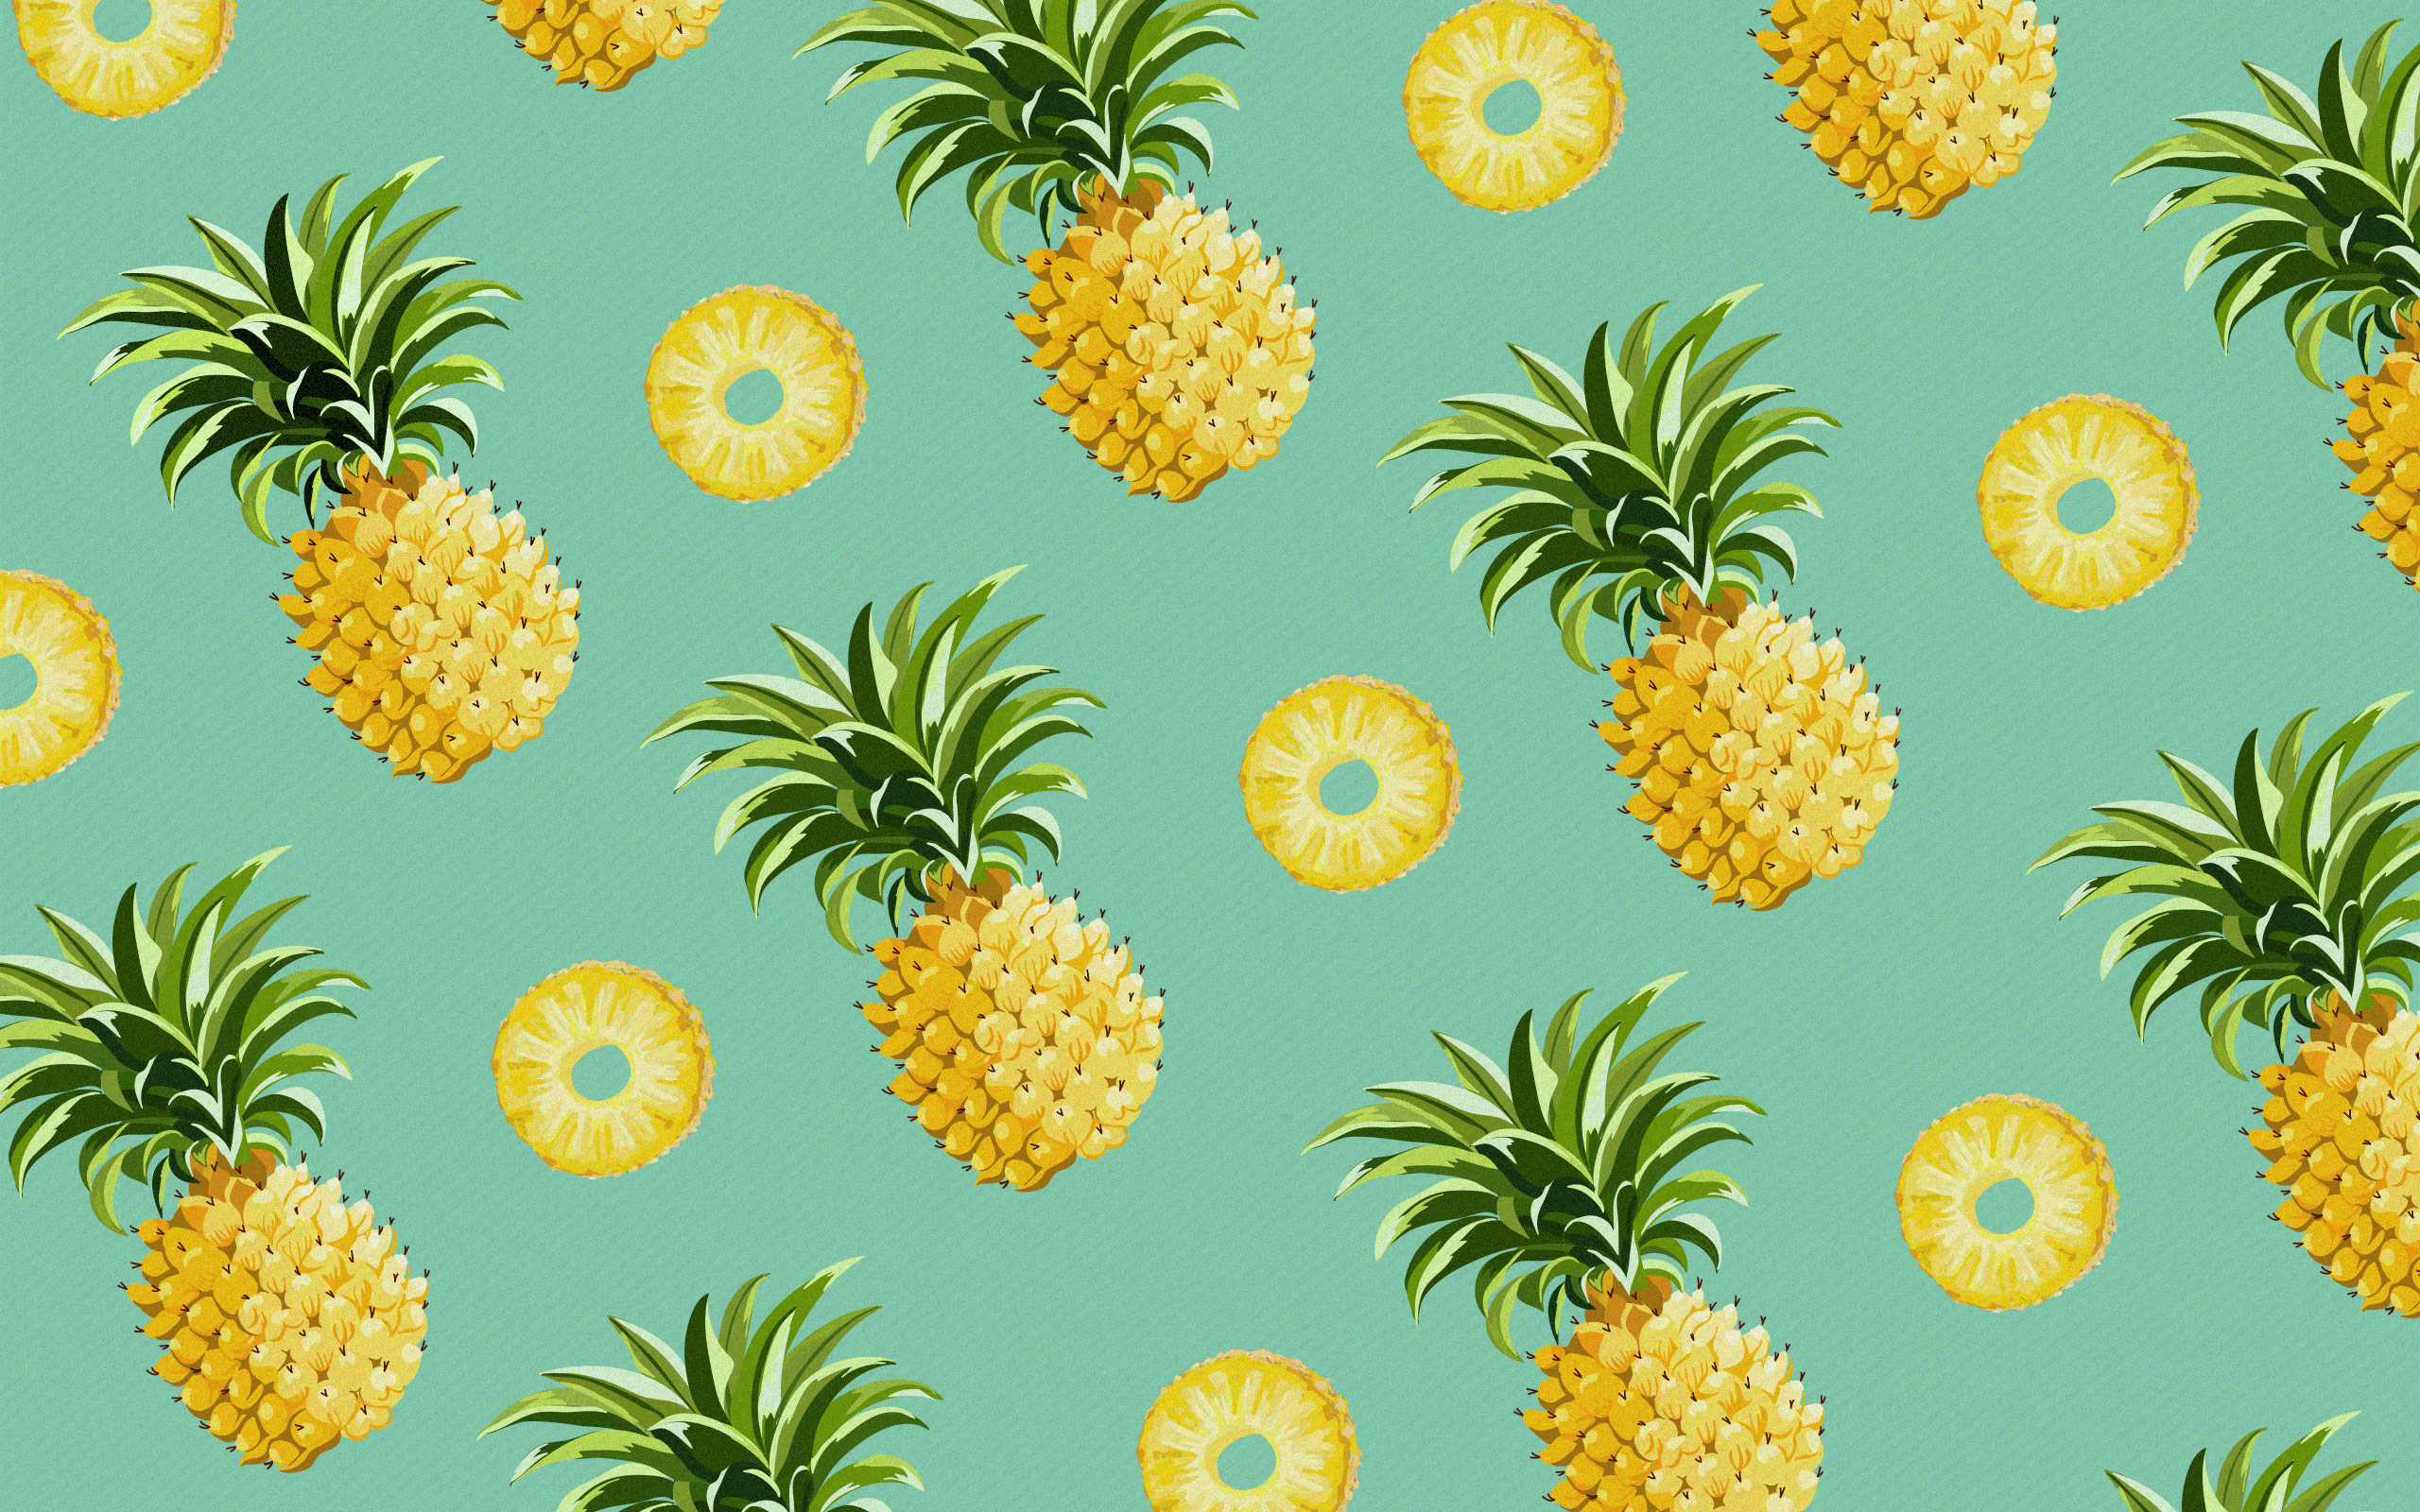 Pineapple Wallpapers and Background Images - stmed.net